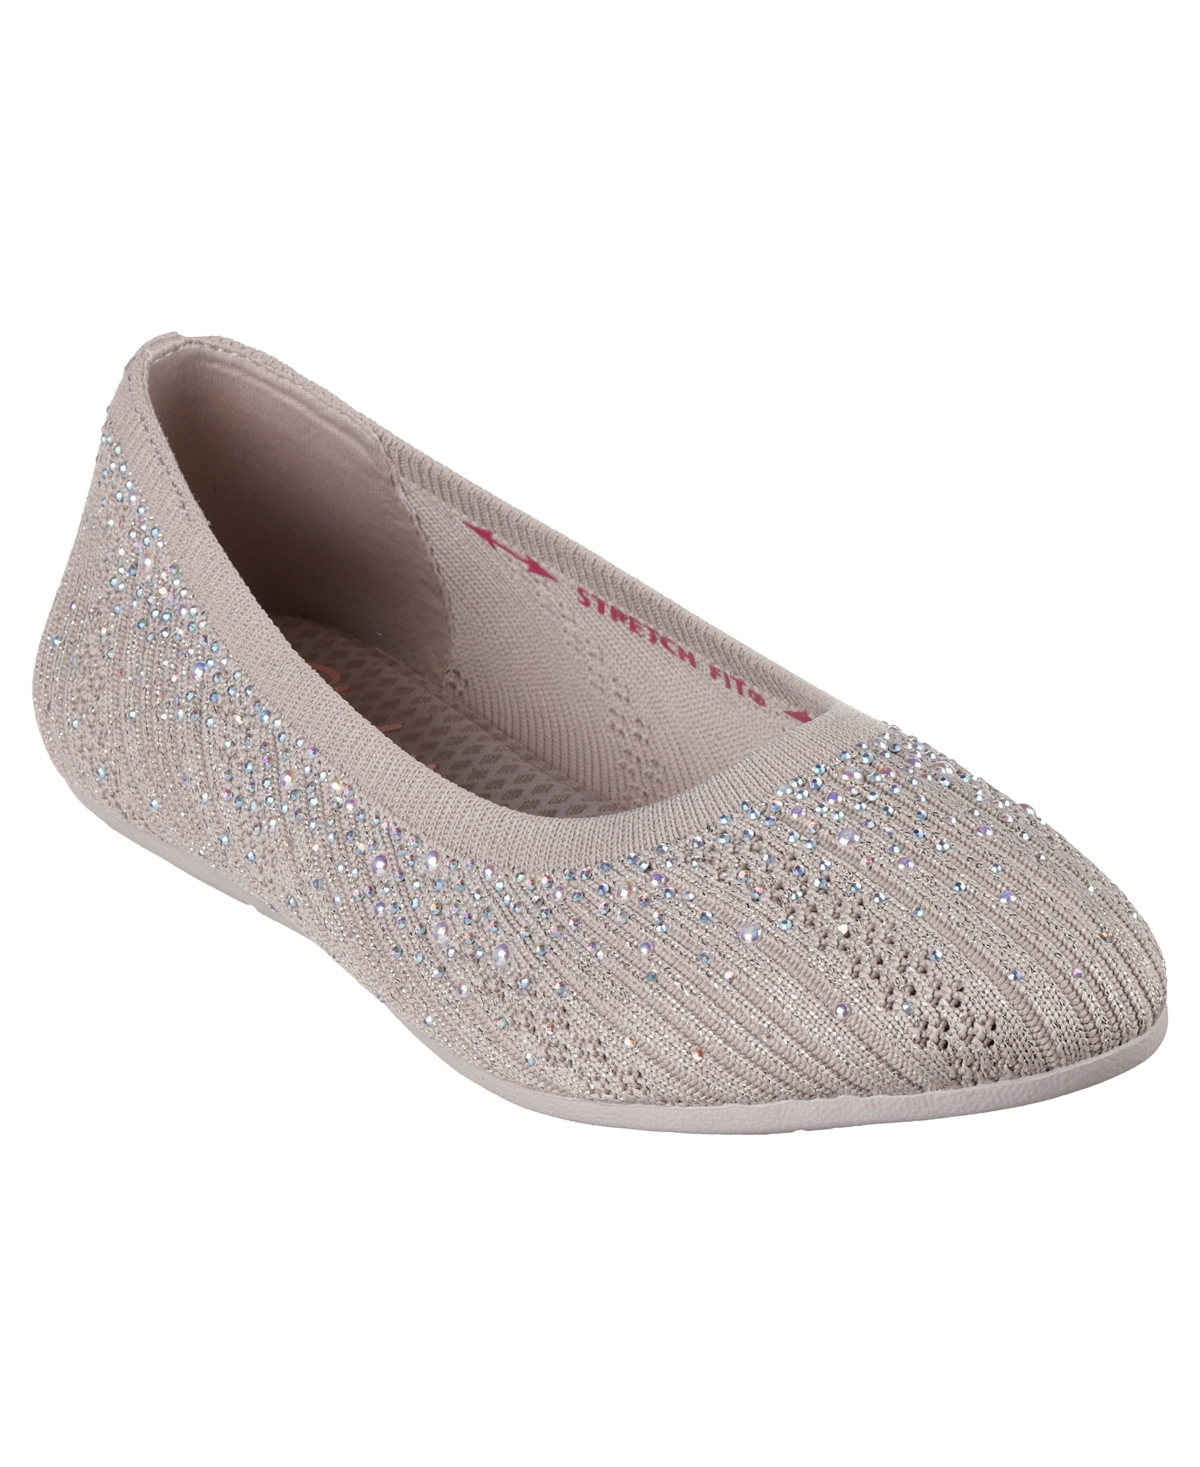 Women's Cleo 2.0 - Glitzy Days Slip-On Casual Ballet Flats from Finish Line - Black